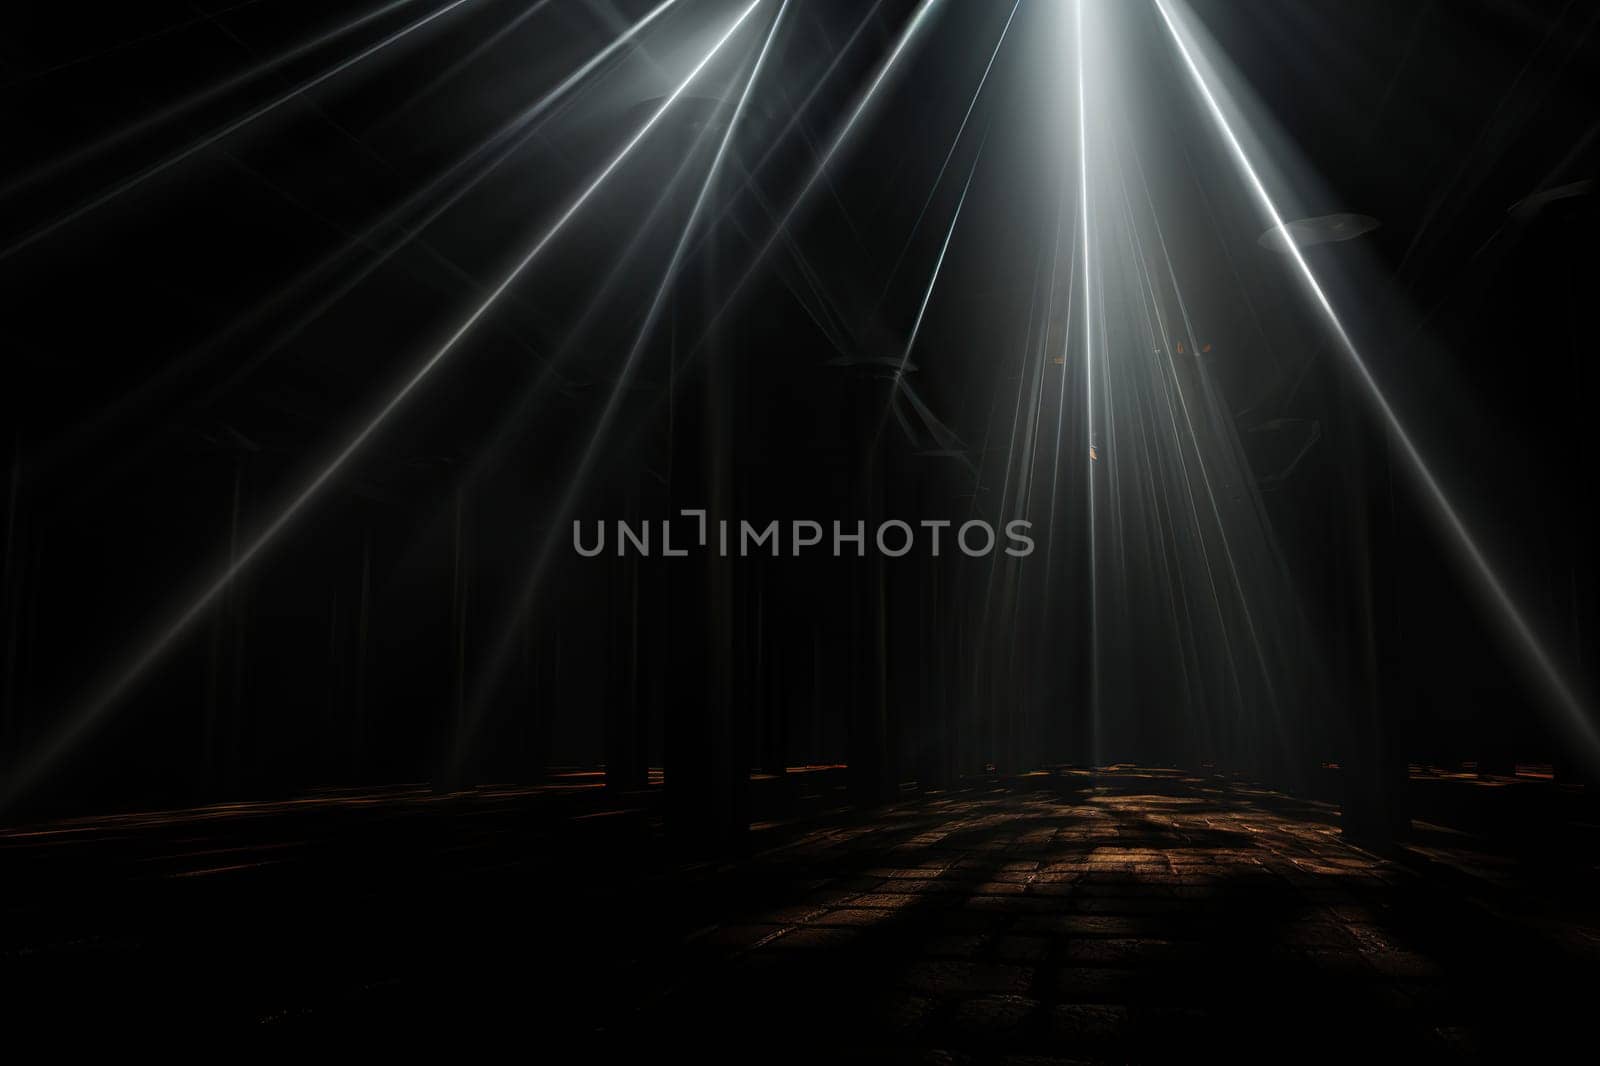 The dark surface is illuminated by bright white rays. Abstract background.